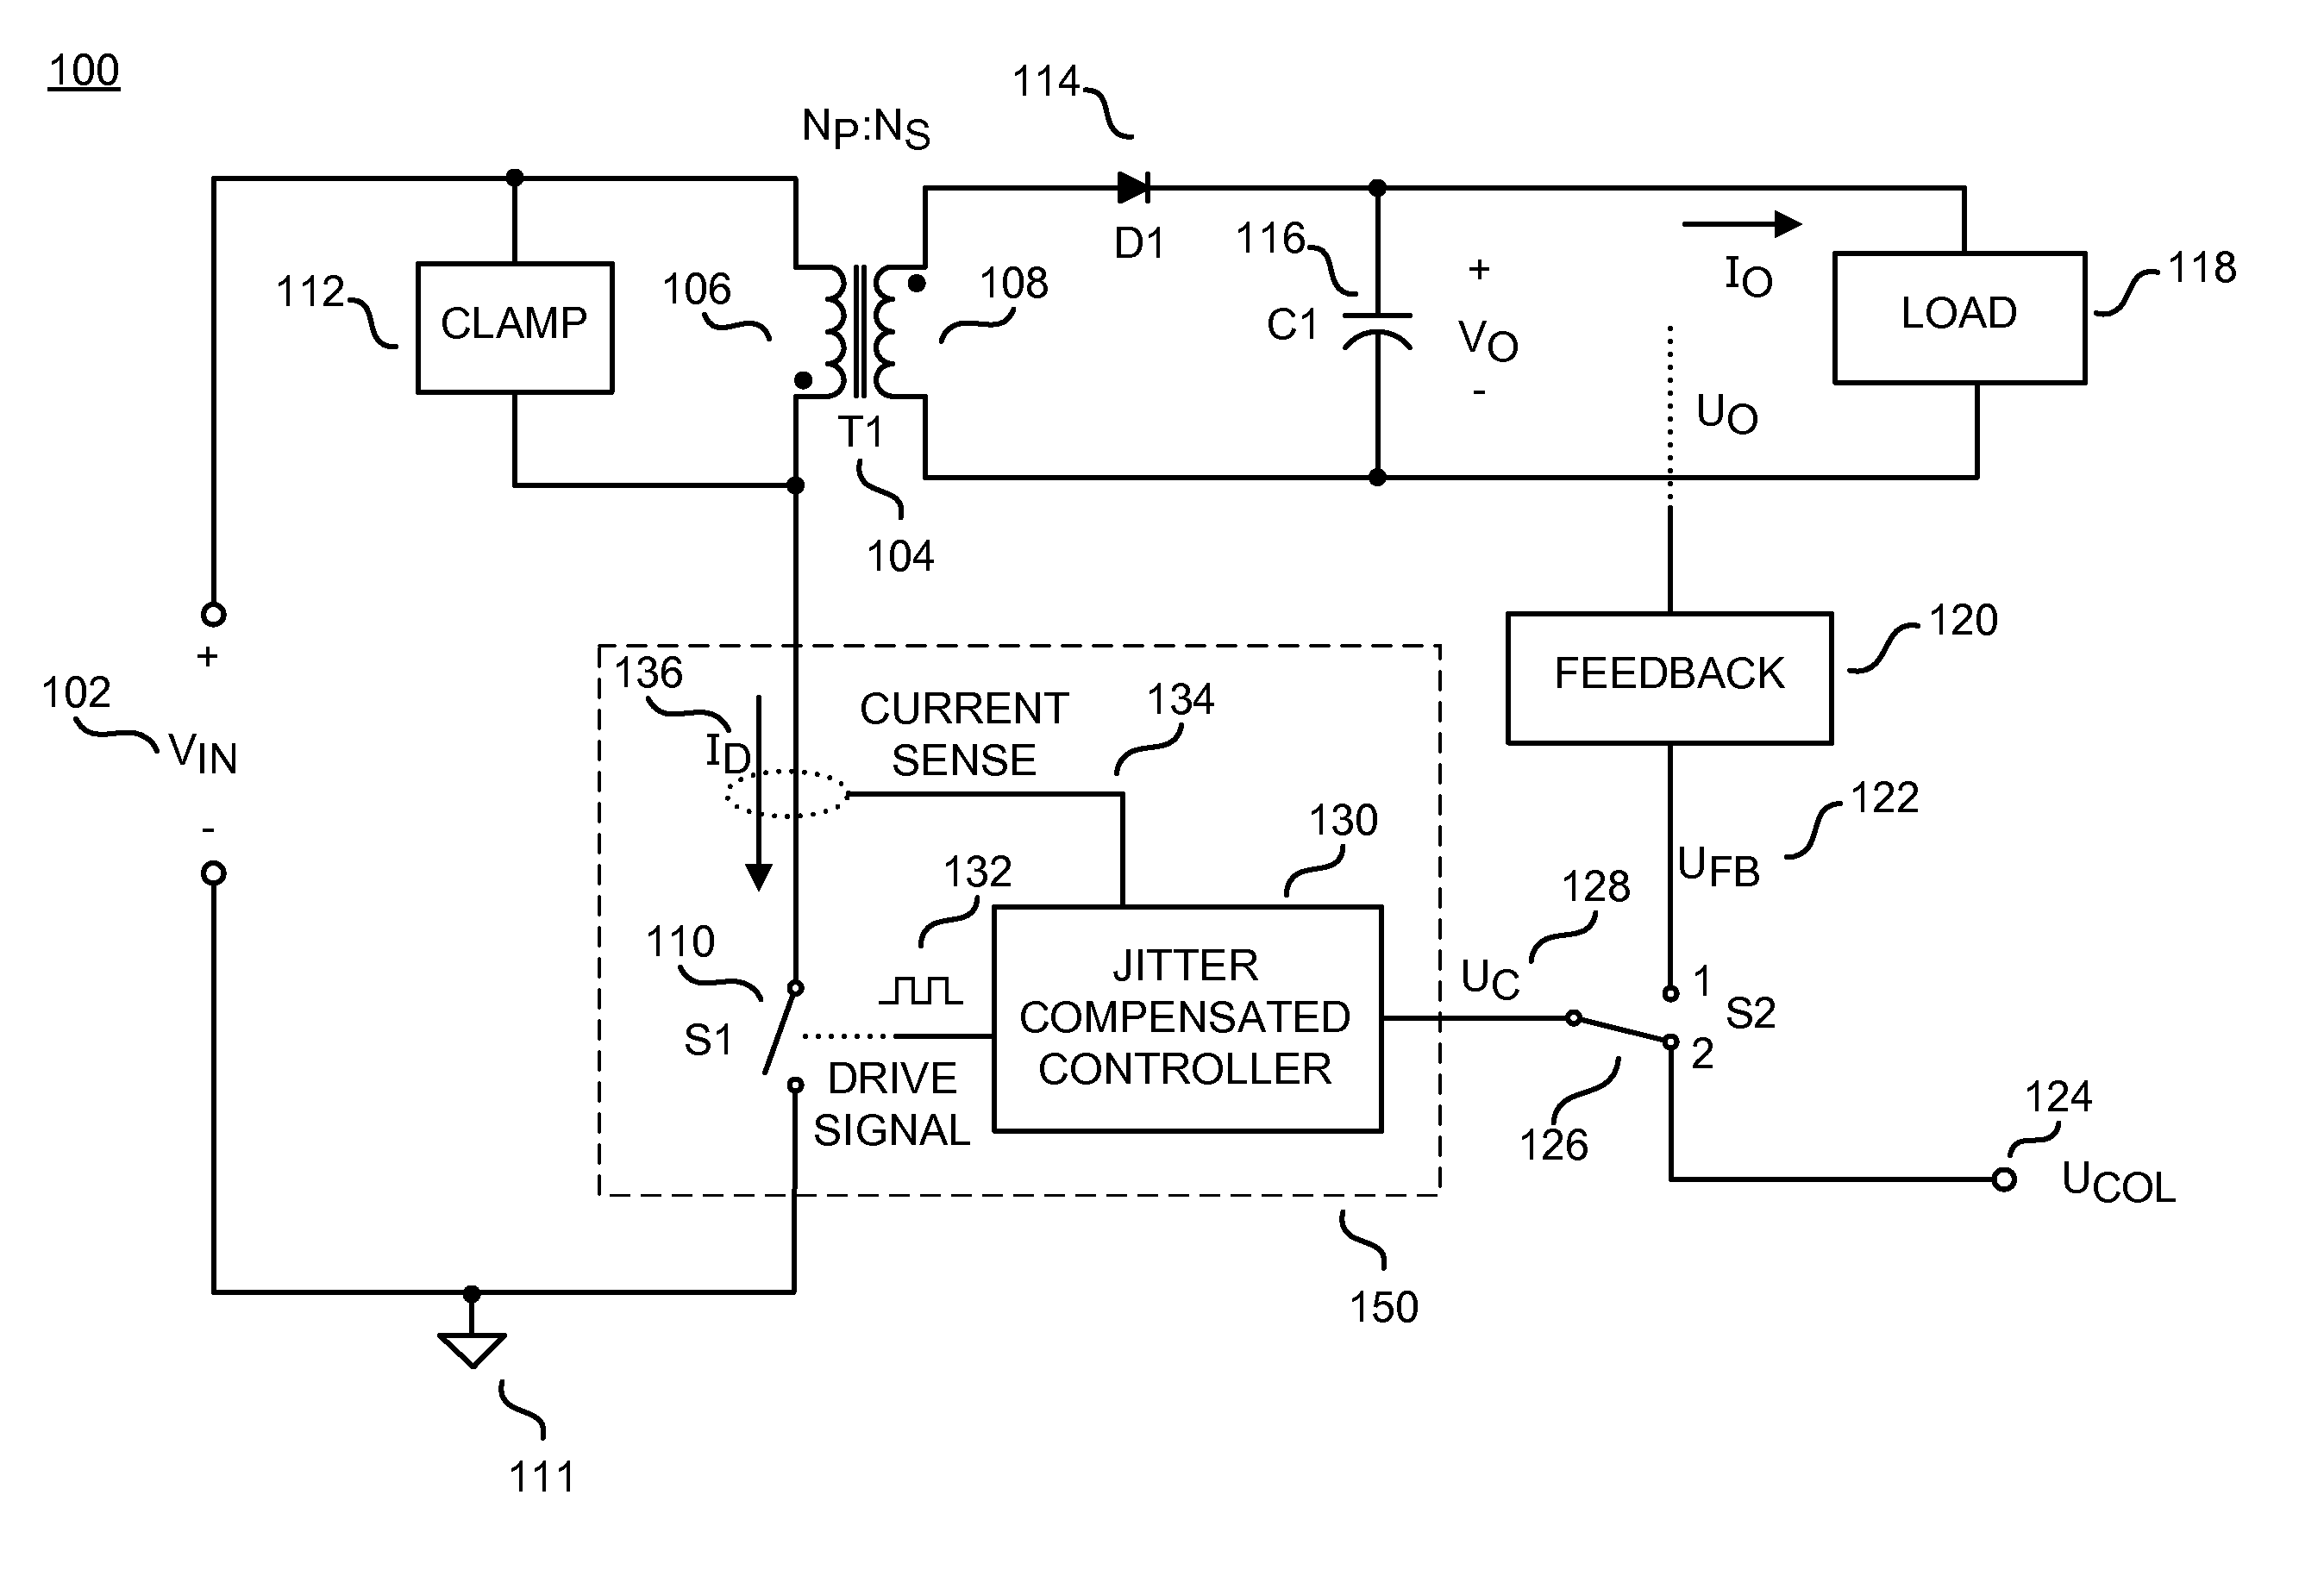 Controller compensation for frequency jitter